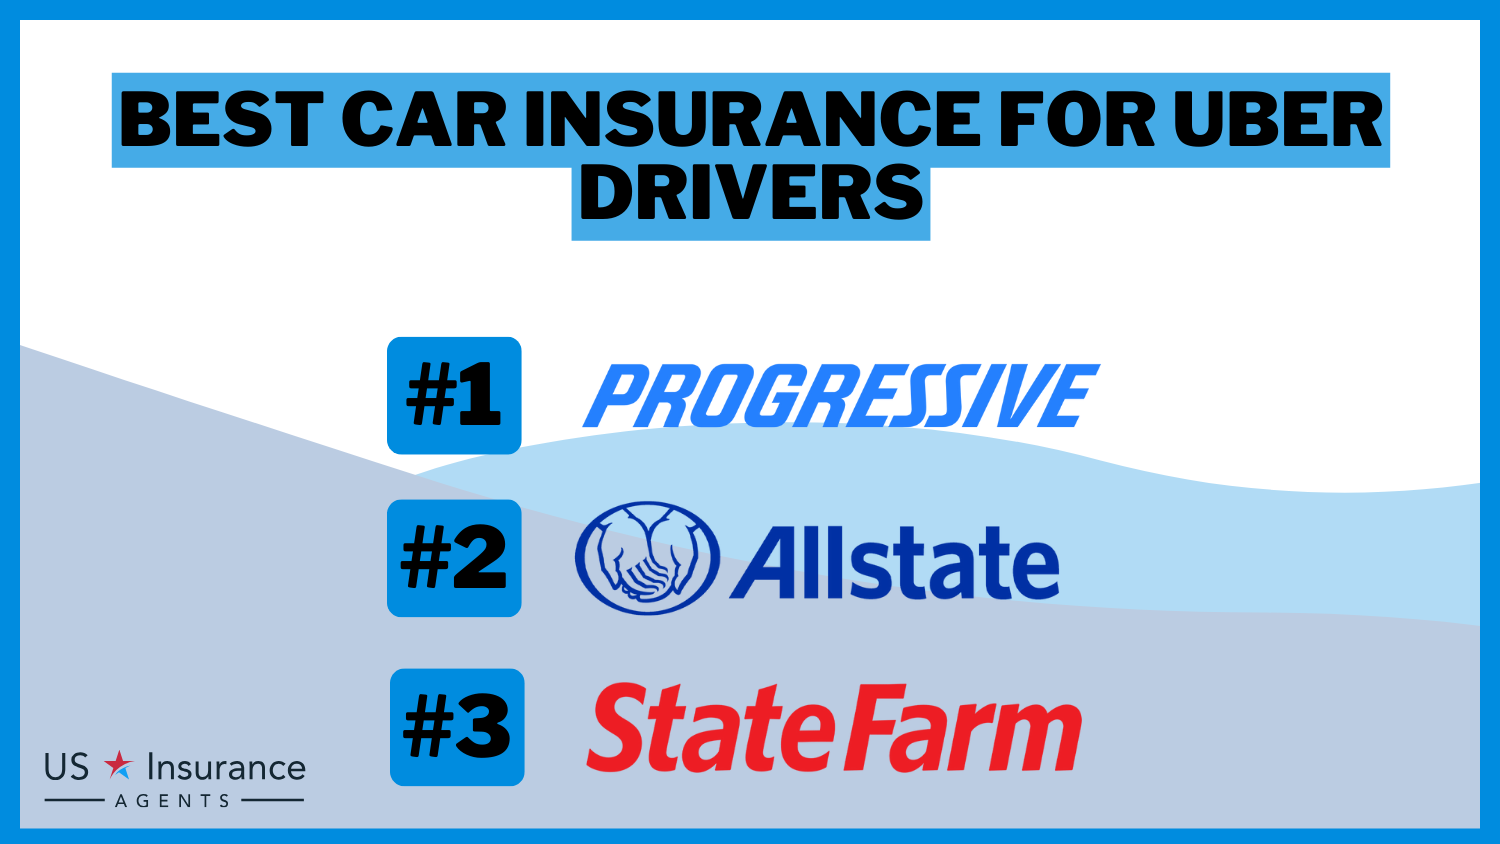 Best Car Insurance for Uber Drivers: Progressive, Allstate, and State Farm